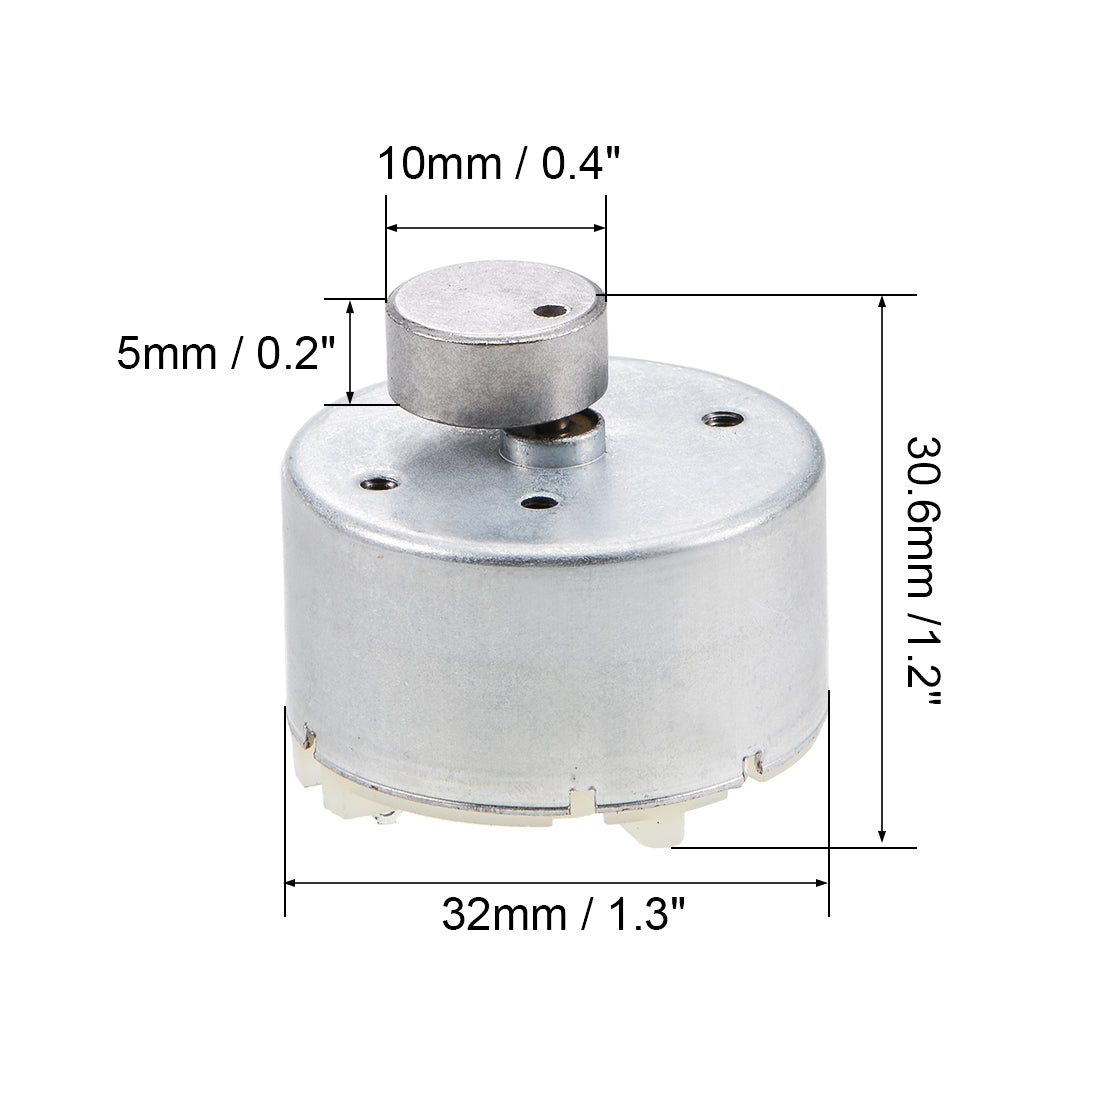 uxcell Uxcell Vibration Motors DC 6V 60mA1300RPM Vibrating Motor Strong Power for DIY Electric  30.6x32mm 5Pcs